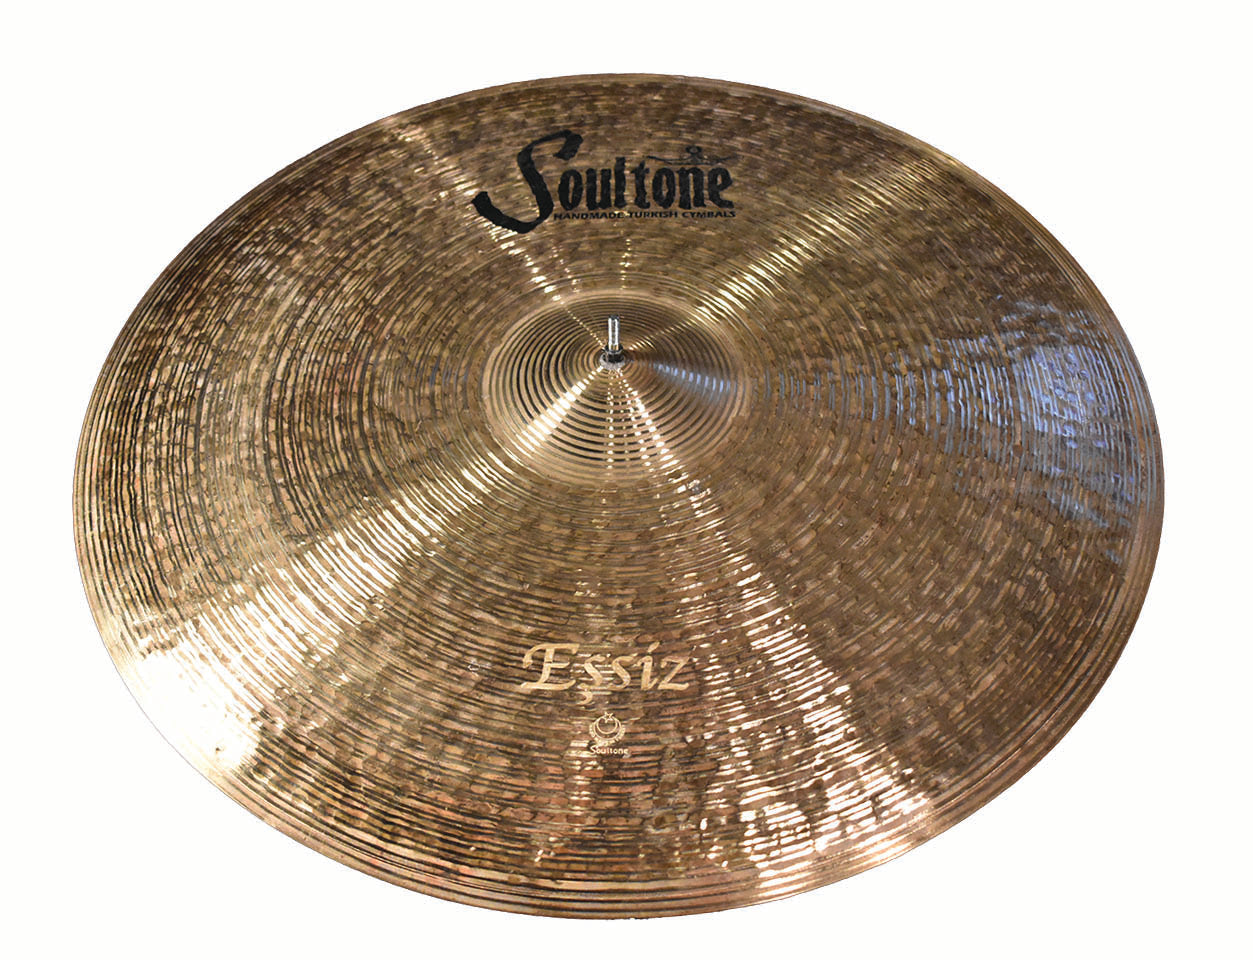 Soultone Cymbals Eşsiz Staccato Ride Cymbal